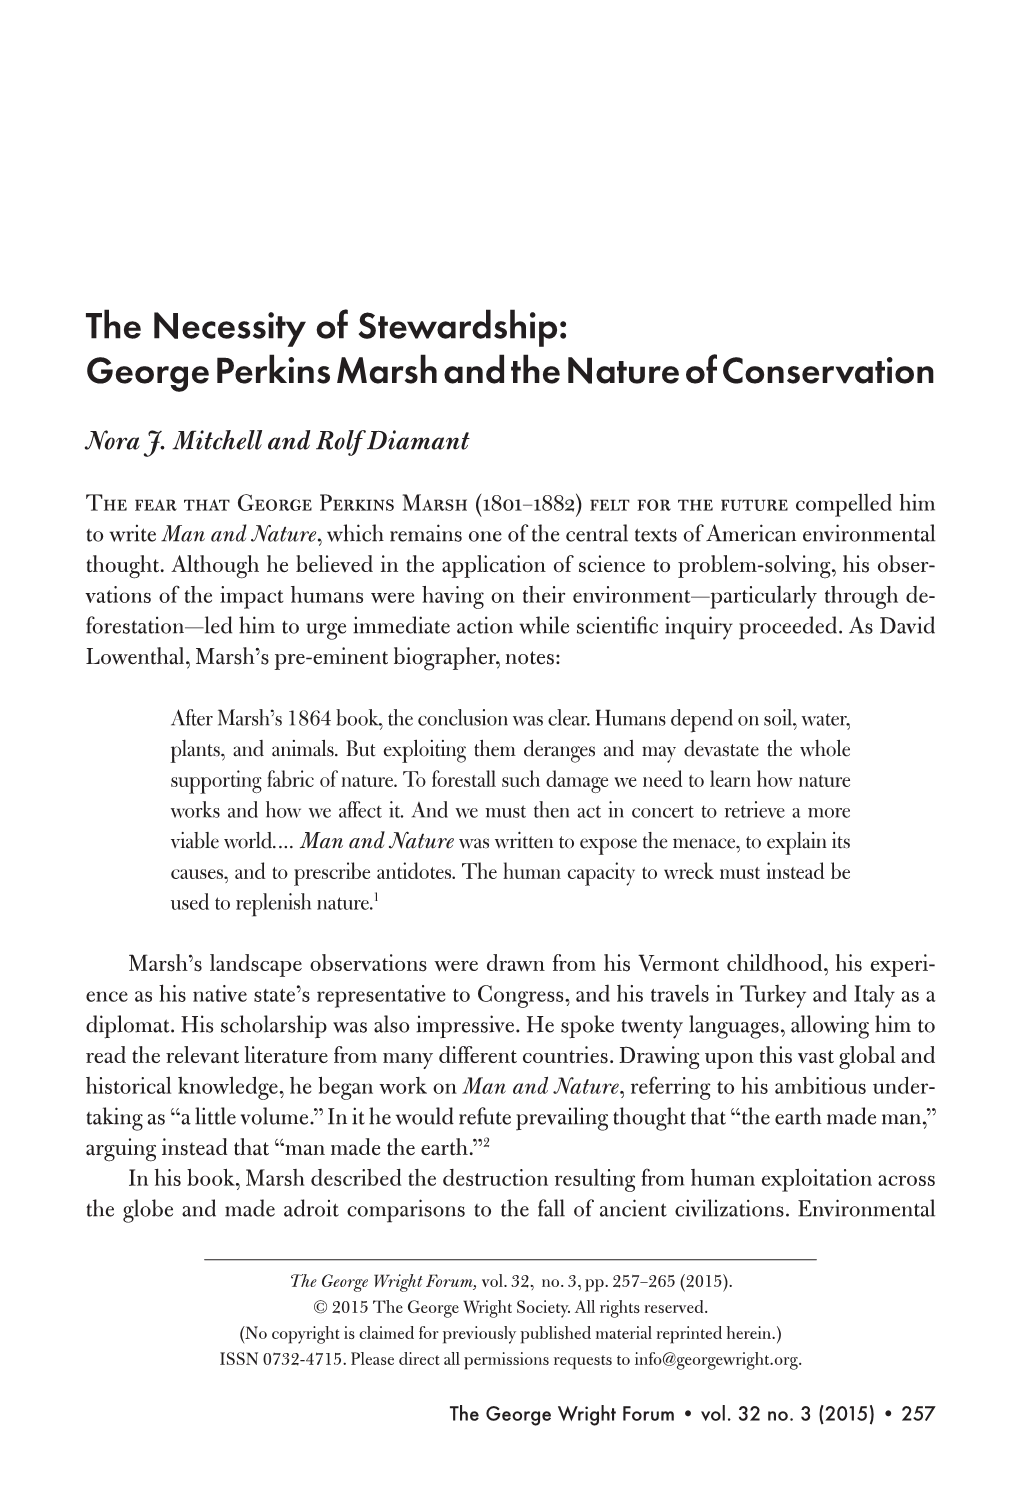 The Necessity of Stewardship: George Perkins Marsh and the Nature of Conservation